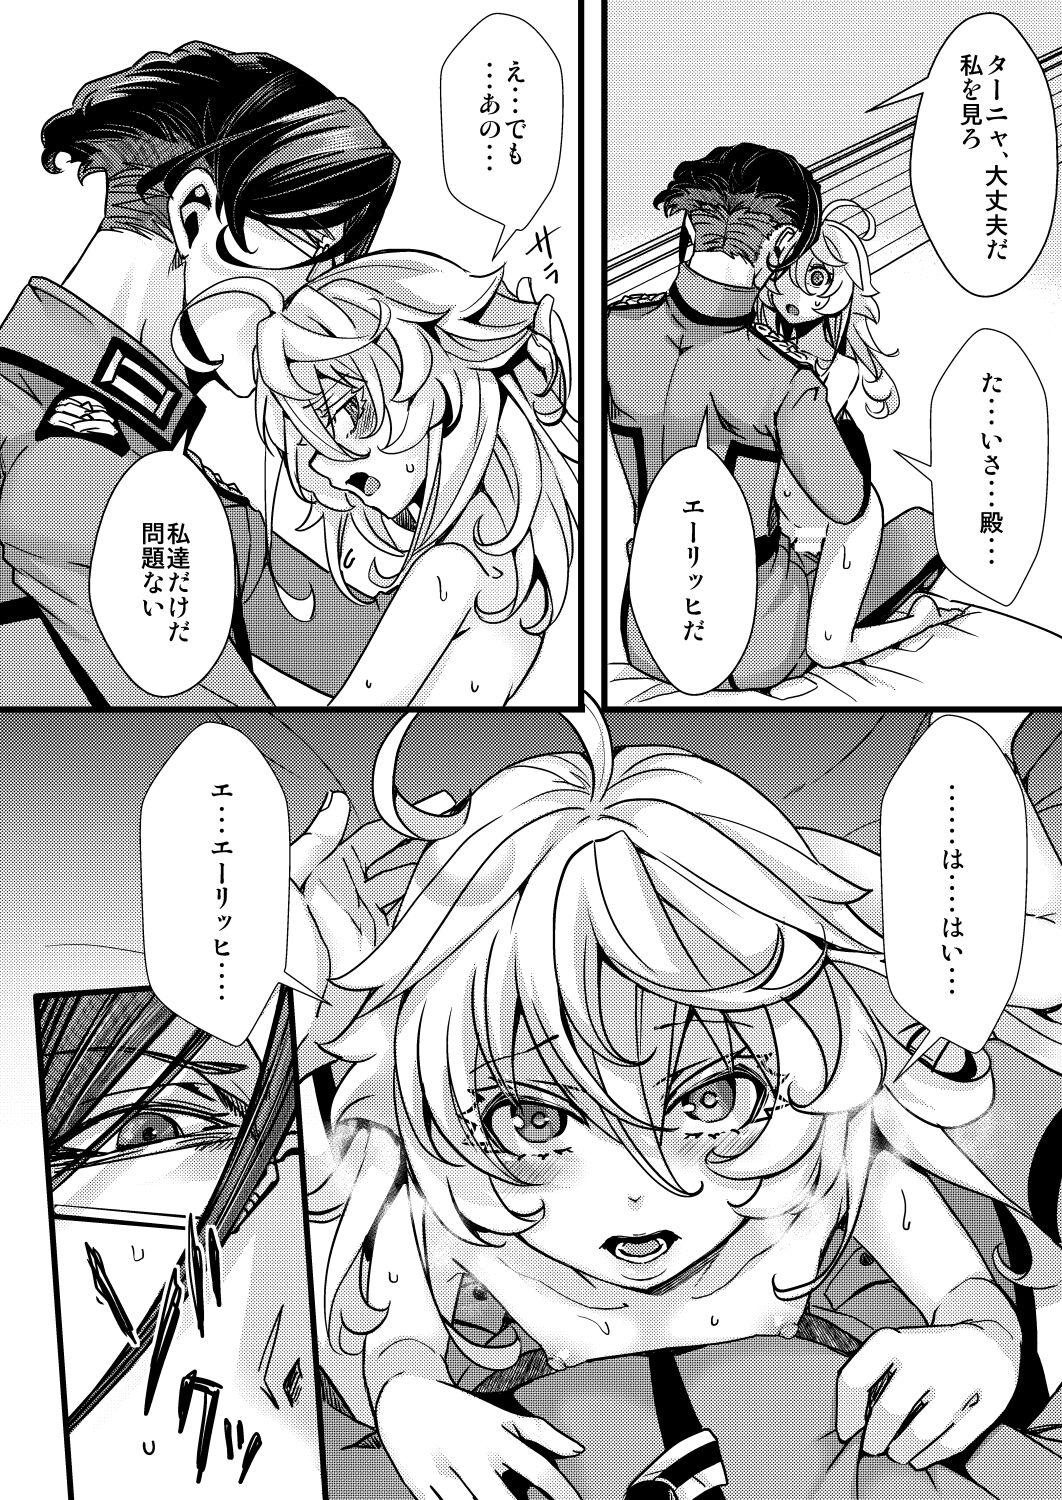 Wet Cunt Rugs - Youjo senki | saga of tanya the evil Gay Party - Page 40